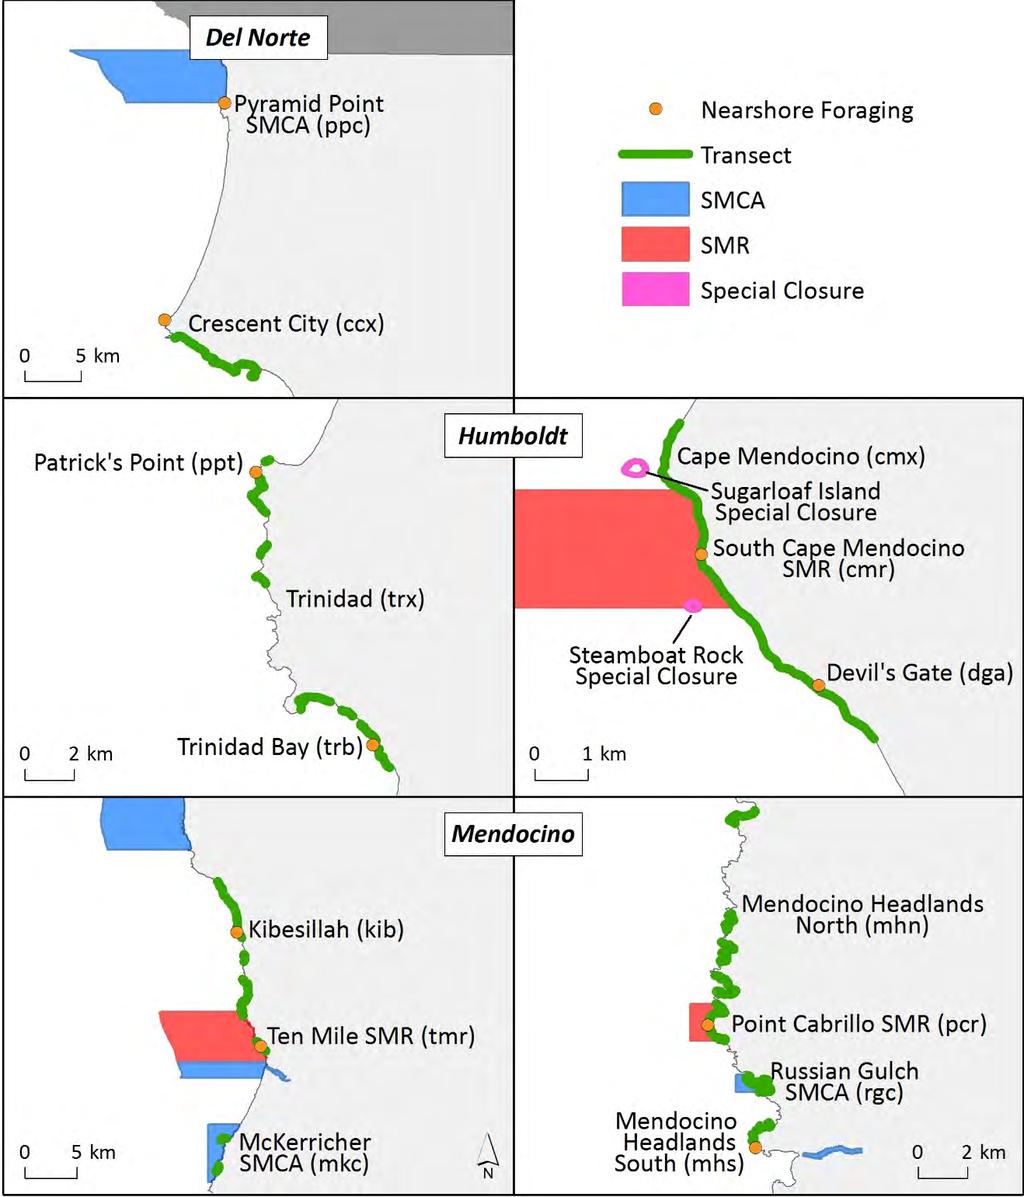 Figure 42. Map showing coastal seabird monitoring sites within the Del Norte (top), Humboldt (middle), and Mendocino (bottom) areas of the North Coast Study Region (NCSR).